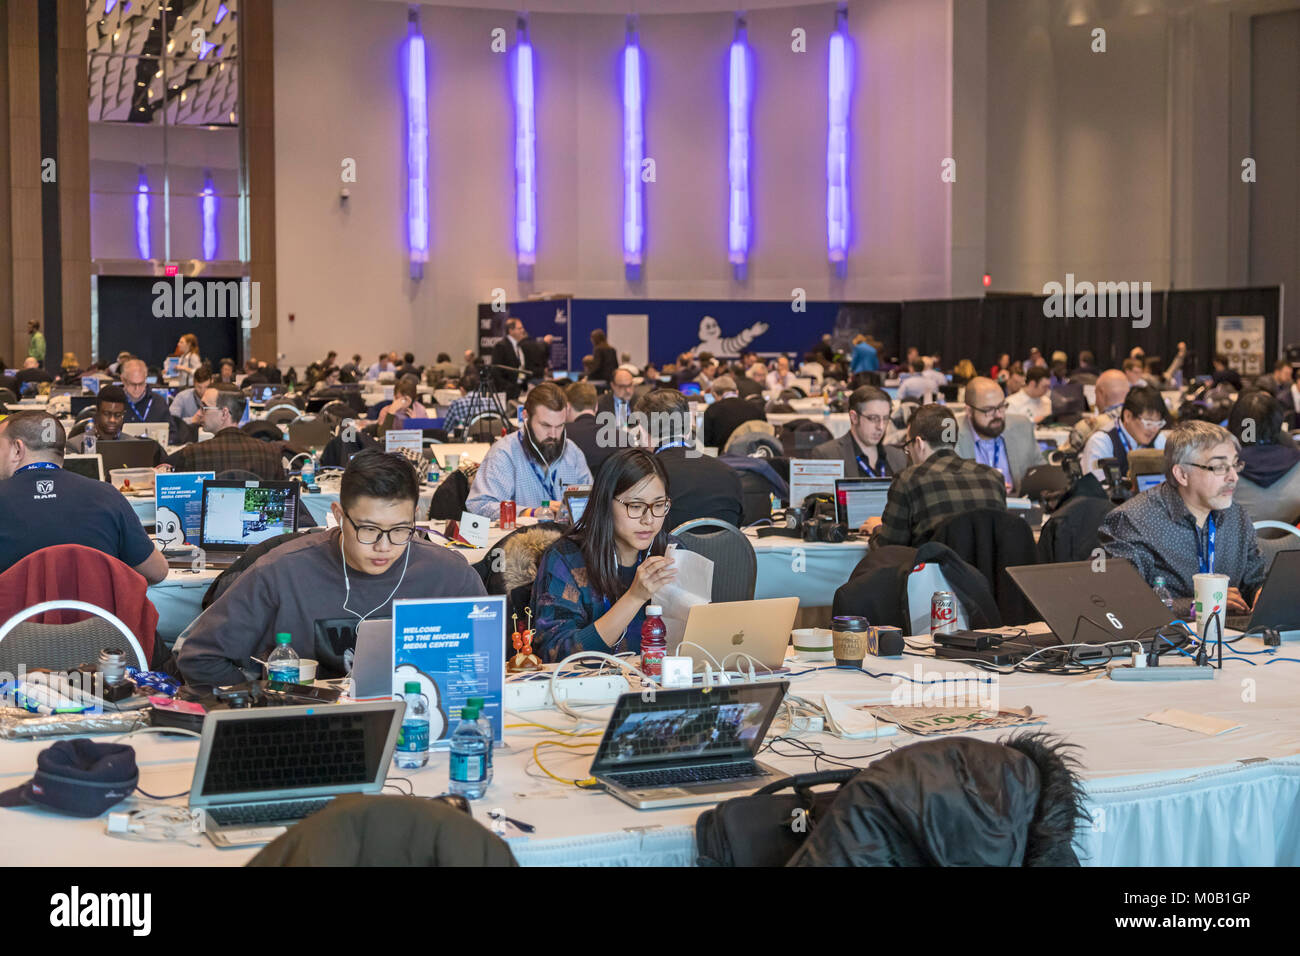 Detroit, Michigan - Journalists at work in the Michelin Media Center during the 2018 North American International Auto Show. About 5,000 journalists f Stock Photo